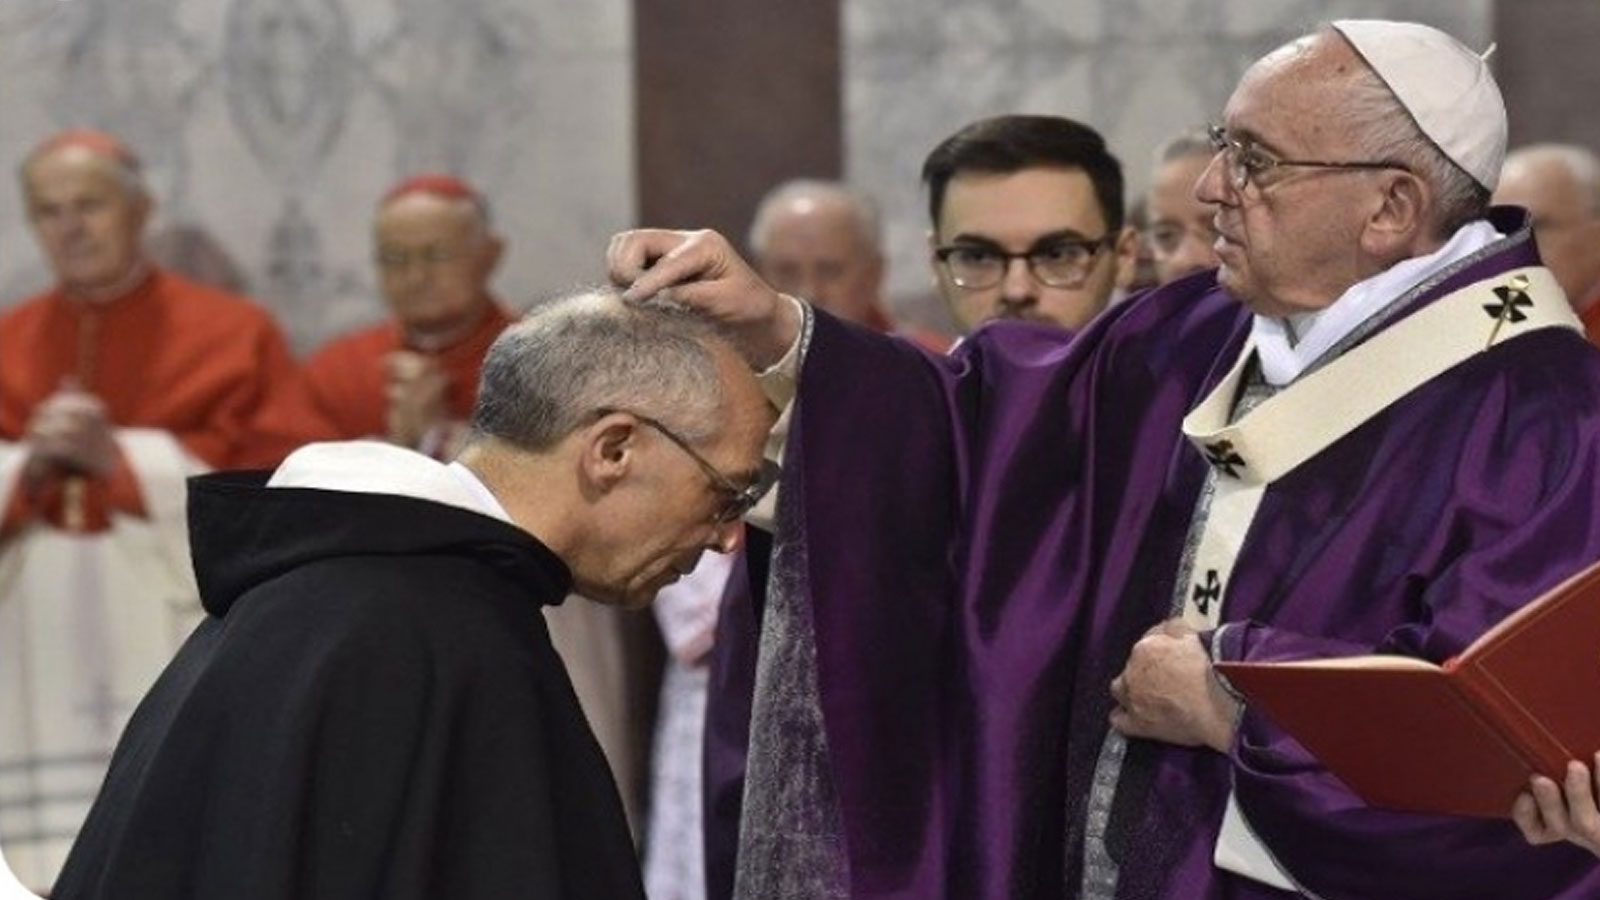 Let us not grow tired of doing good, Pope Francis message for Lent 2022